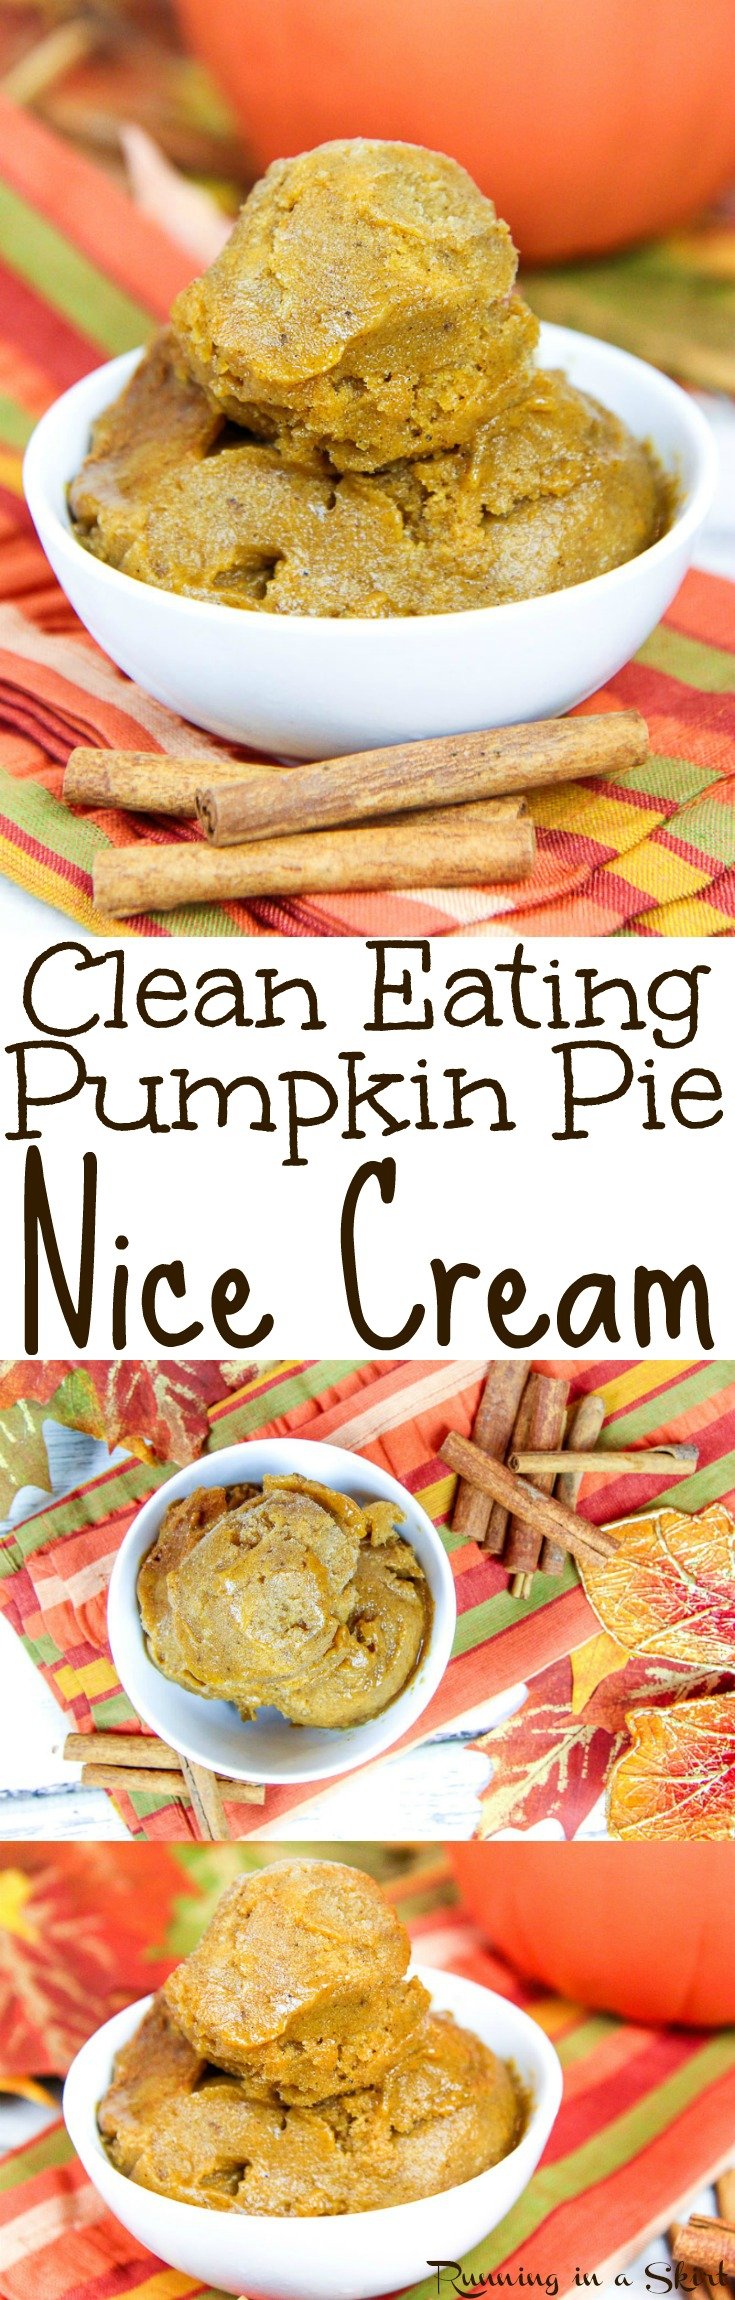 Clean Eating Pumpkin Nice Cream recipe. A healthy pumpkin pie flavored dessert for fall! Homemade, simple and easy with no churn or ice cream maker. Uses banana with no added sugar! Vegan & Dairy-free / Running in a Skirt via @juliewunder